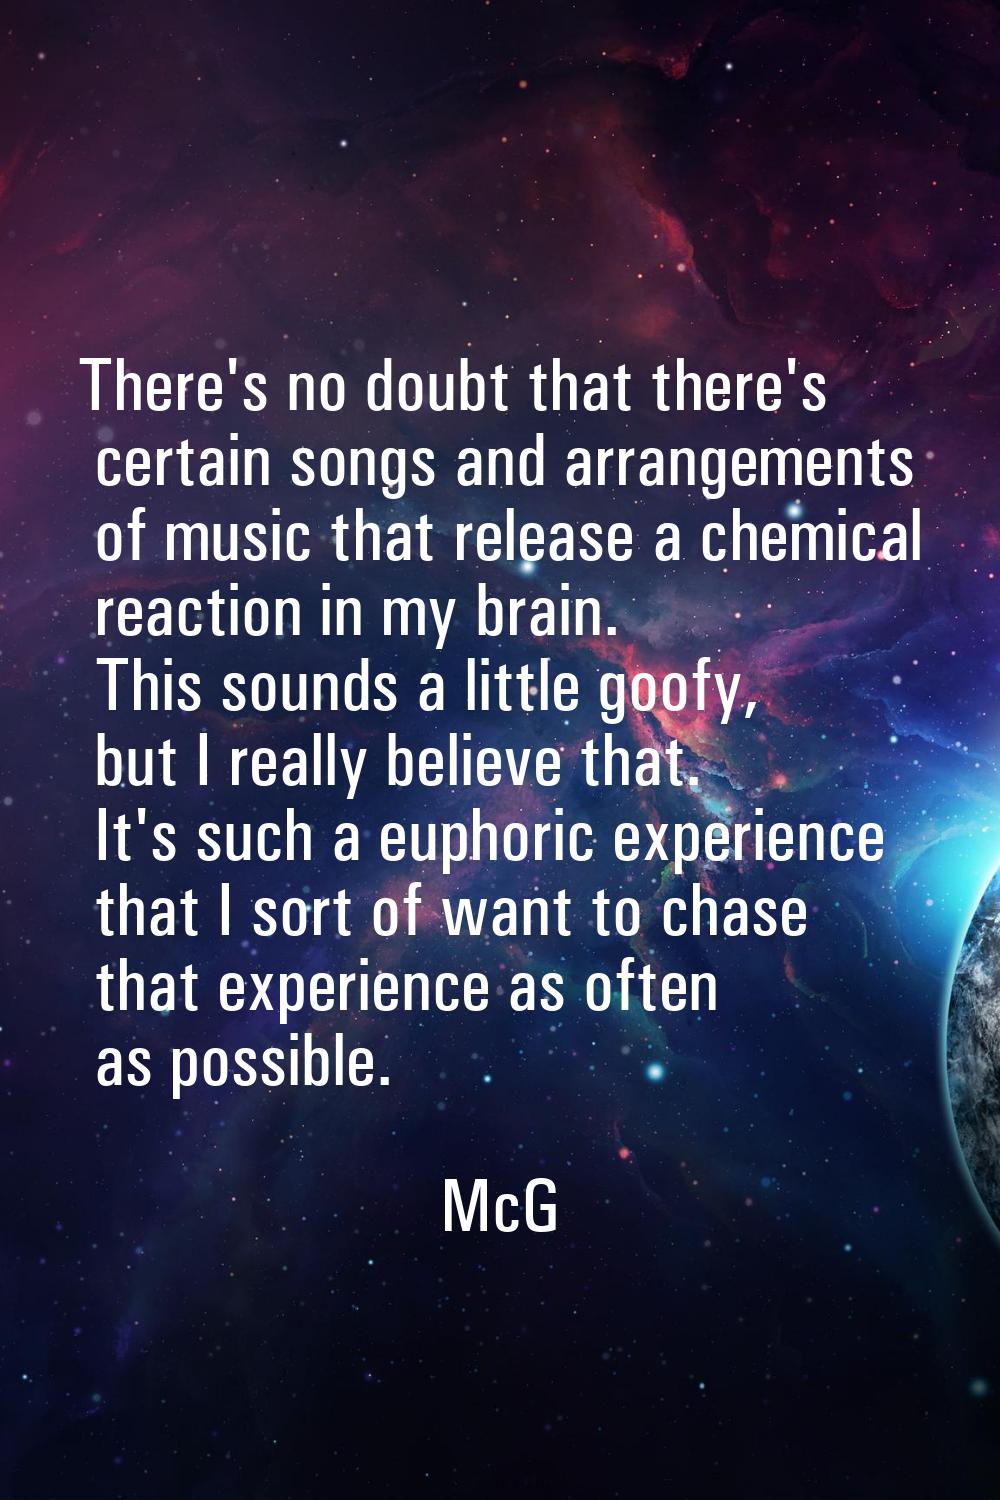 There's no doubt that there's certain songs and arrangements of music that release a chemical react